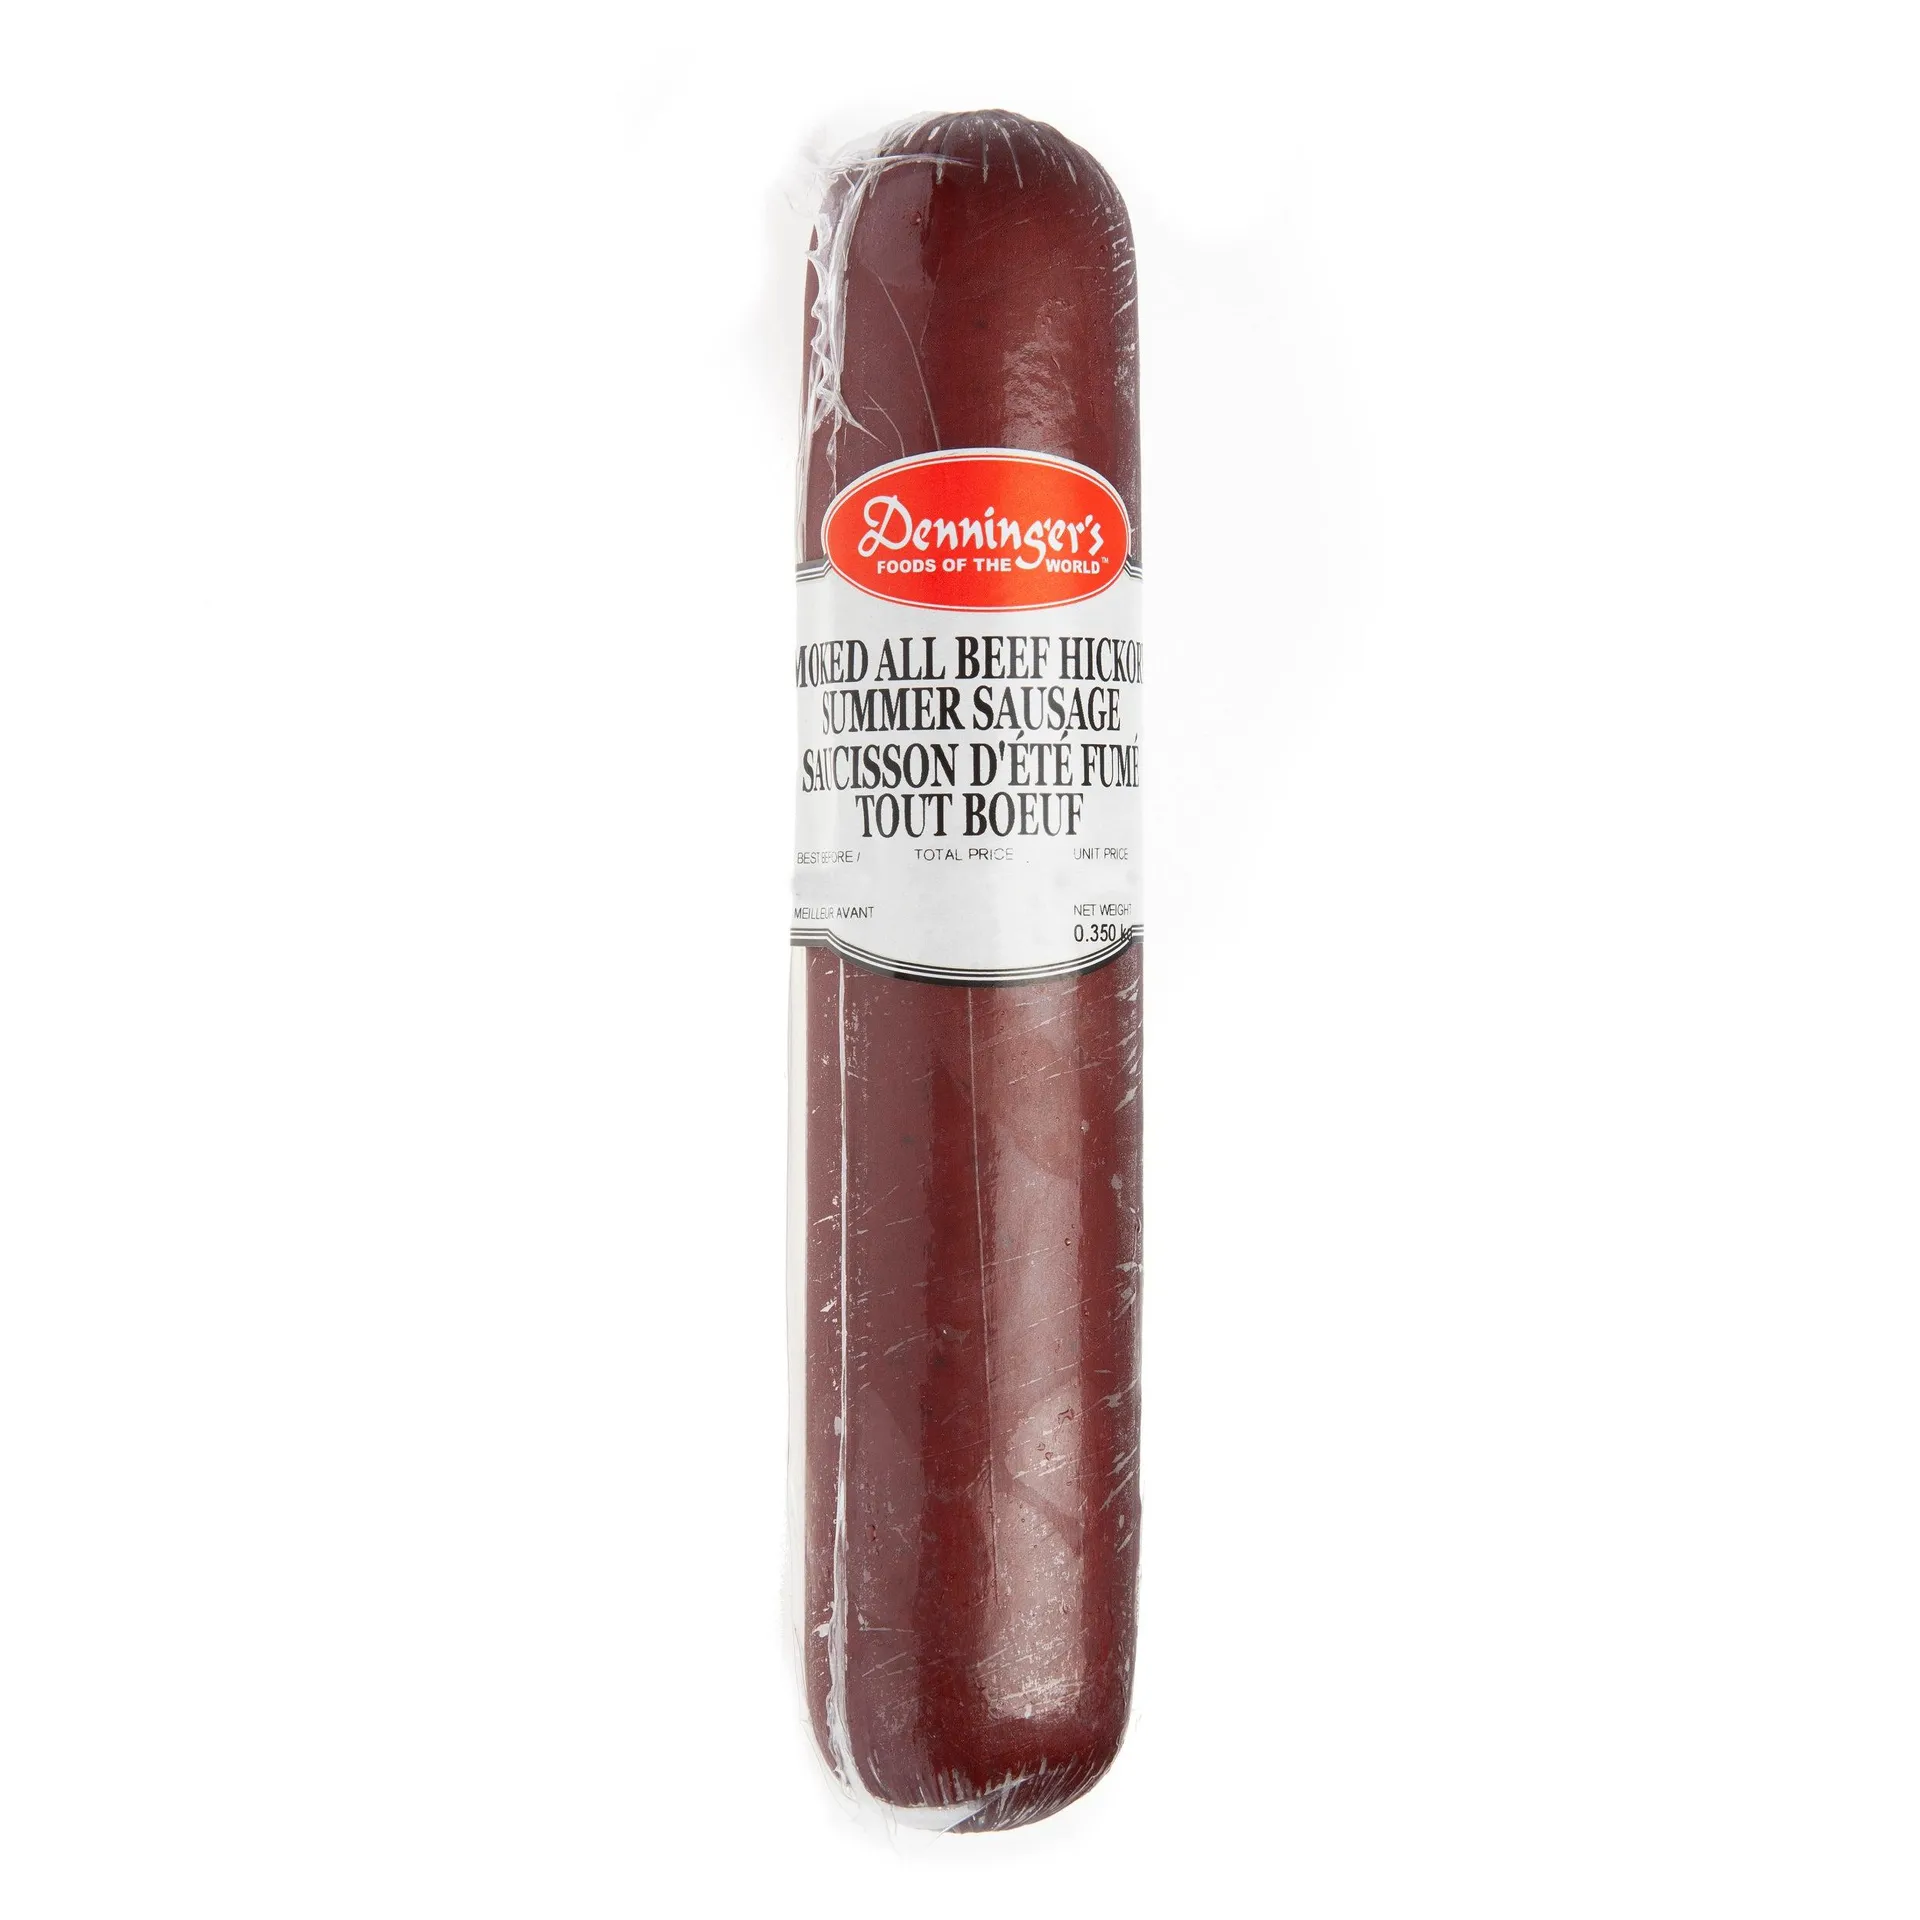 All Beef Hickory Salami - 350 g